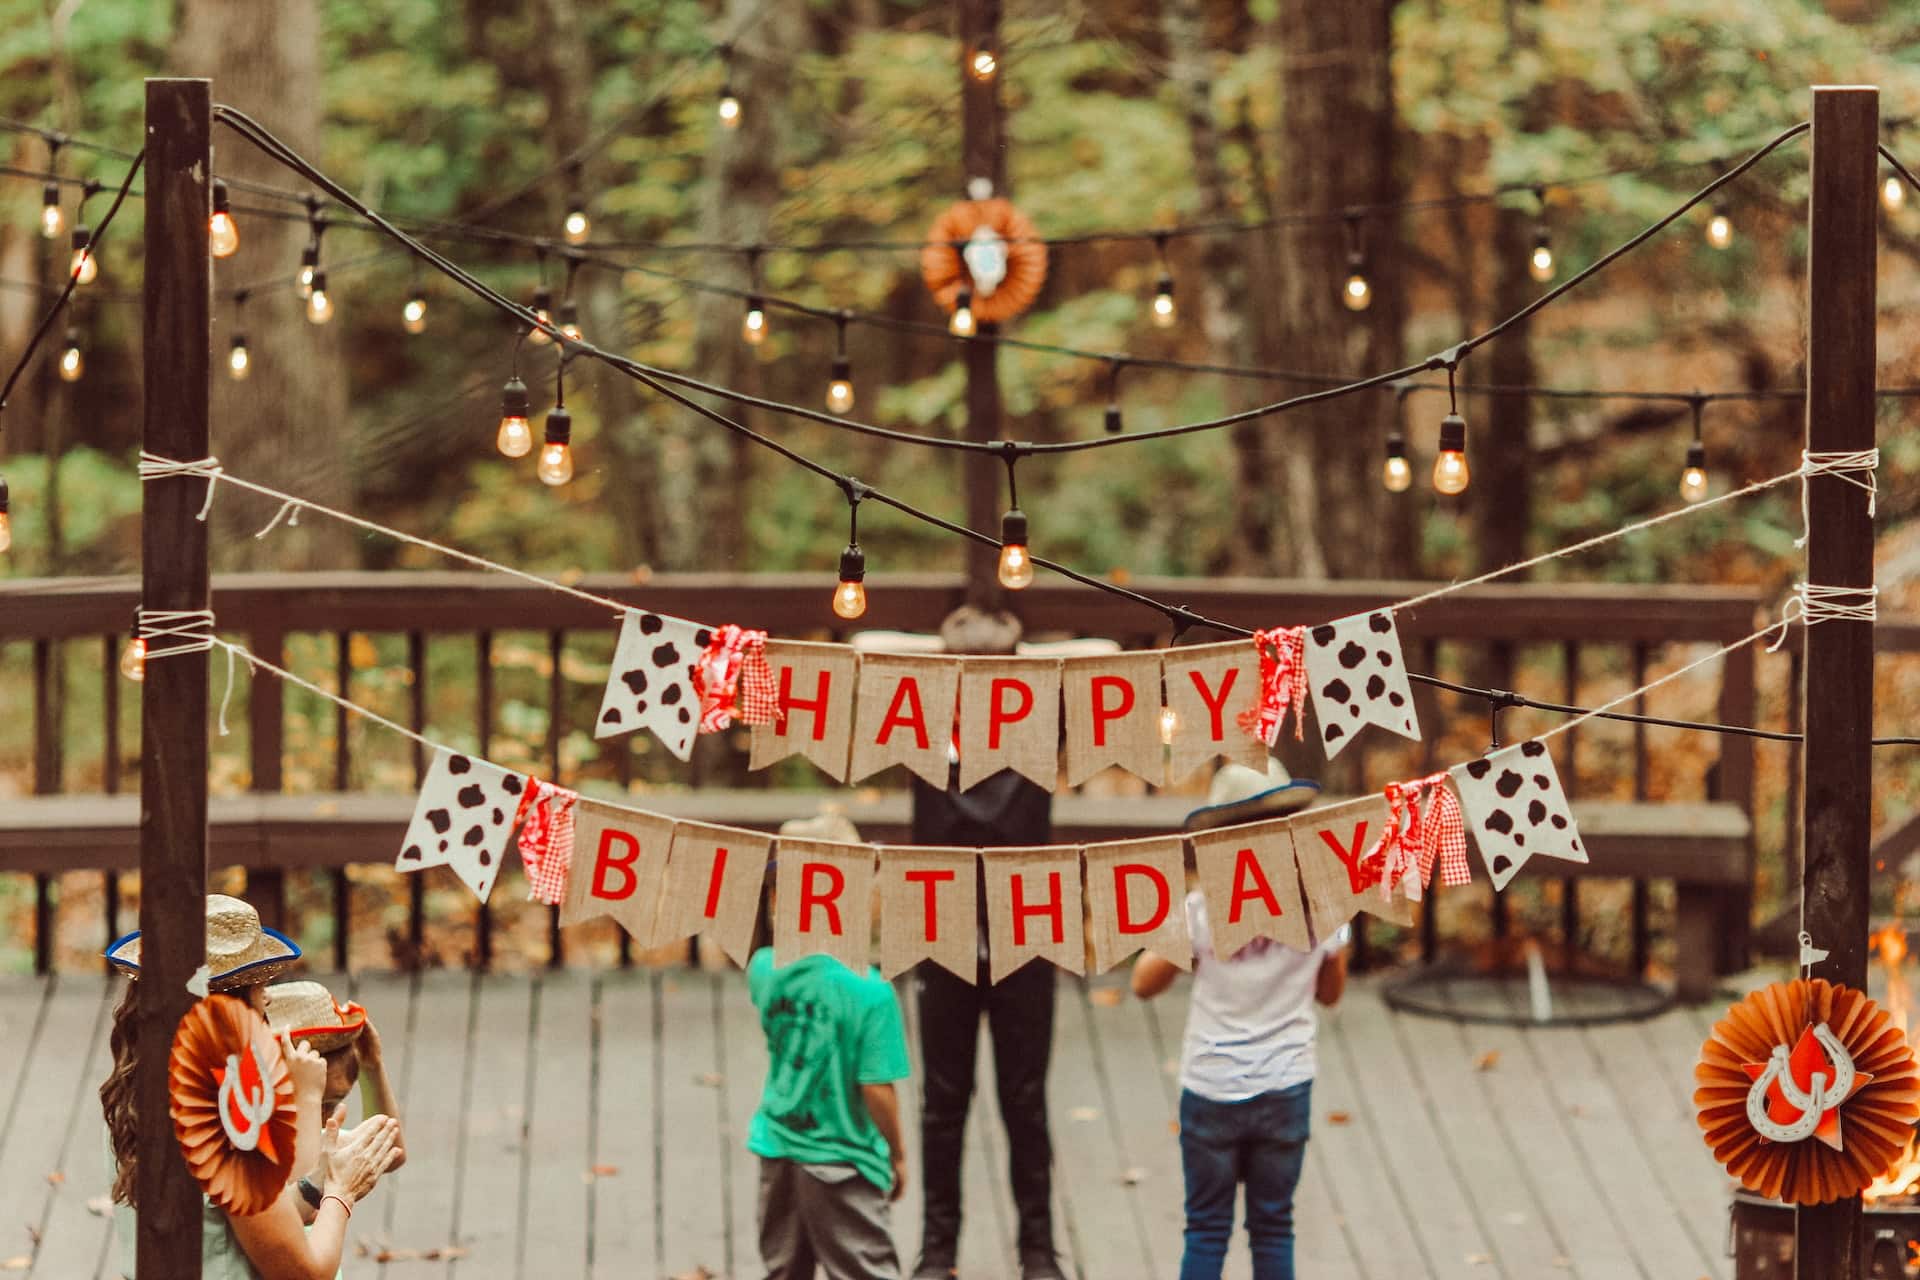 Make your birthday party unforgettable with these balloon decorating ideas!